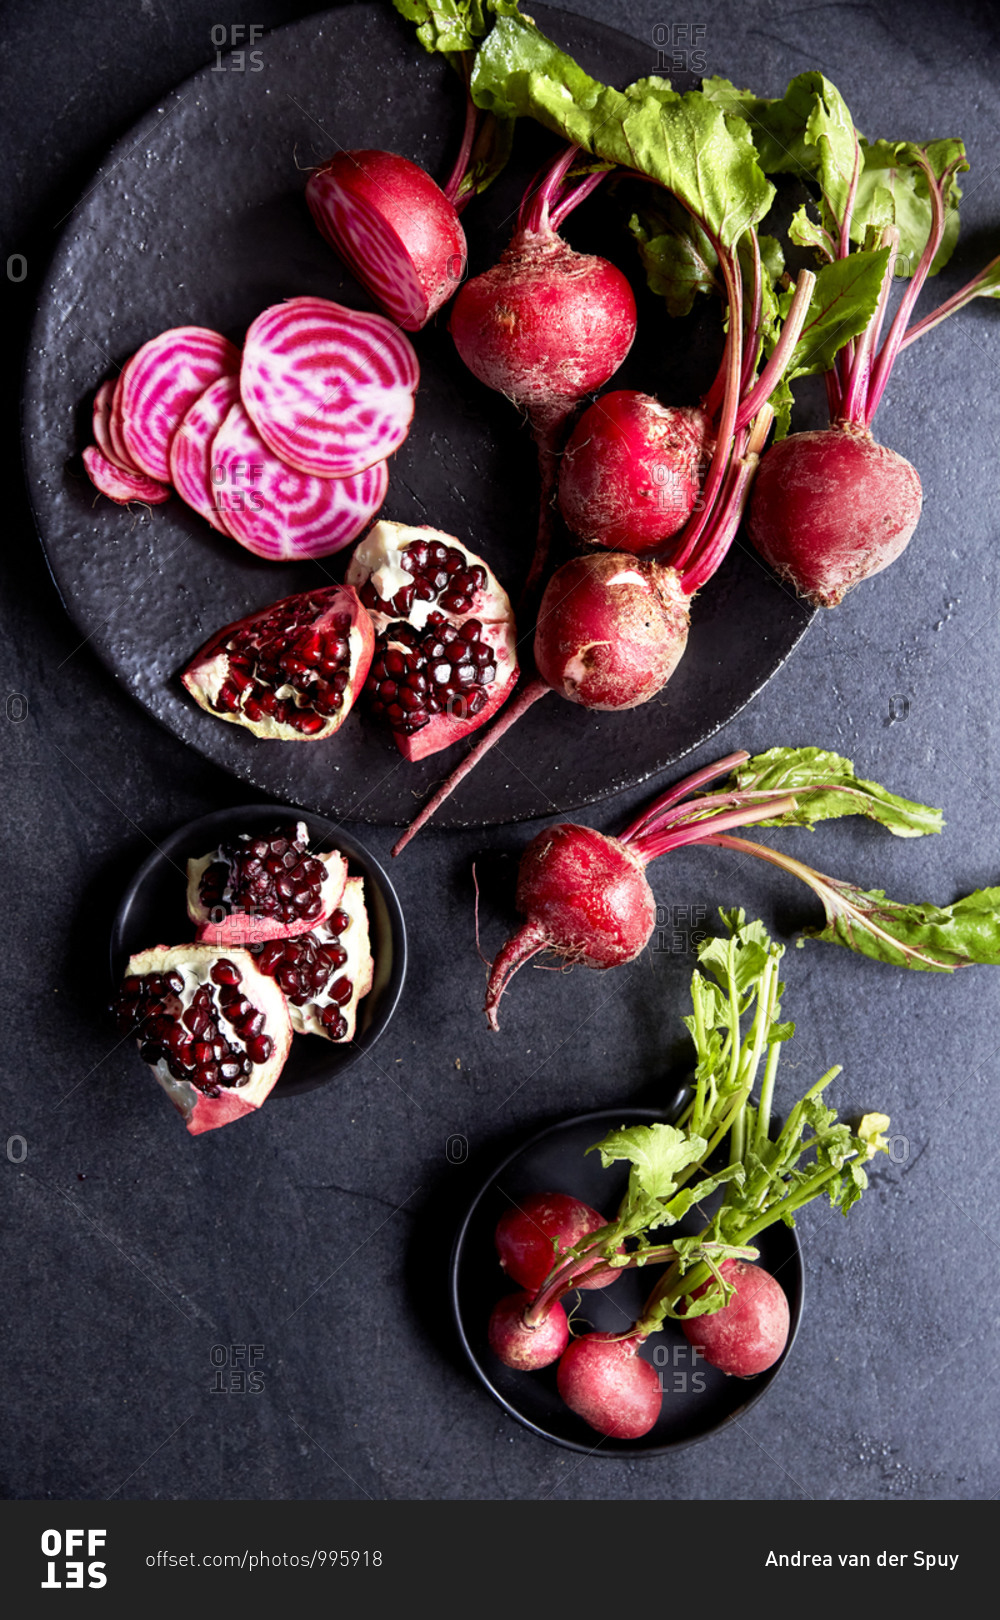 A bunch of candy stripe beetroot and sliced pomegranate on plates